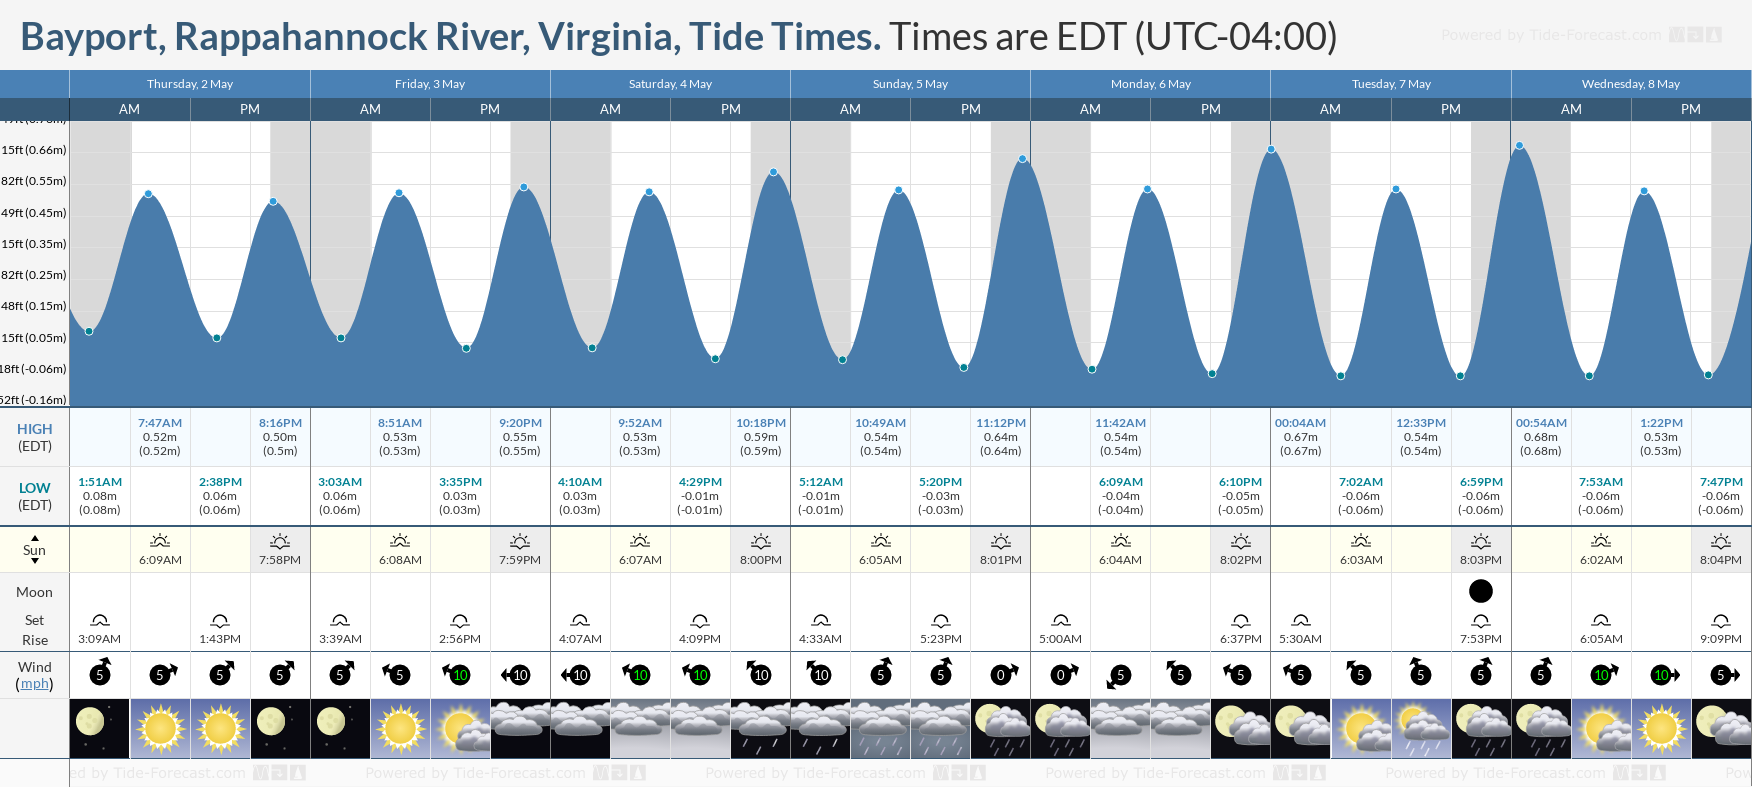 Bayport, Rappahannock River, Virginia Tide Chart including high and low tide tide times for the next 7 days